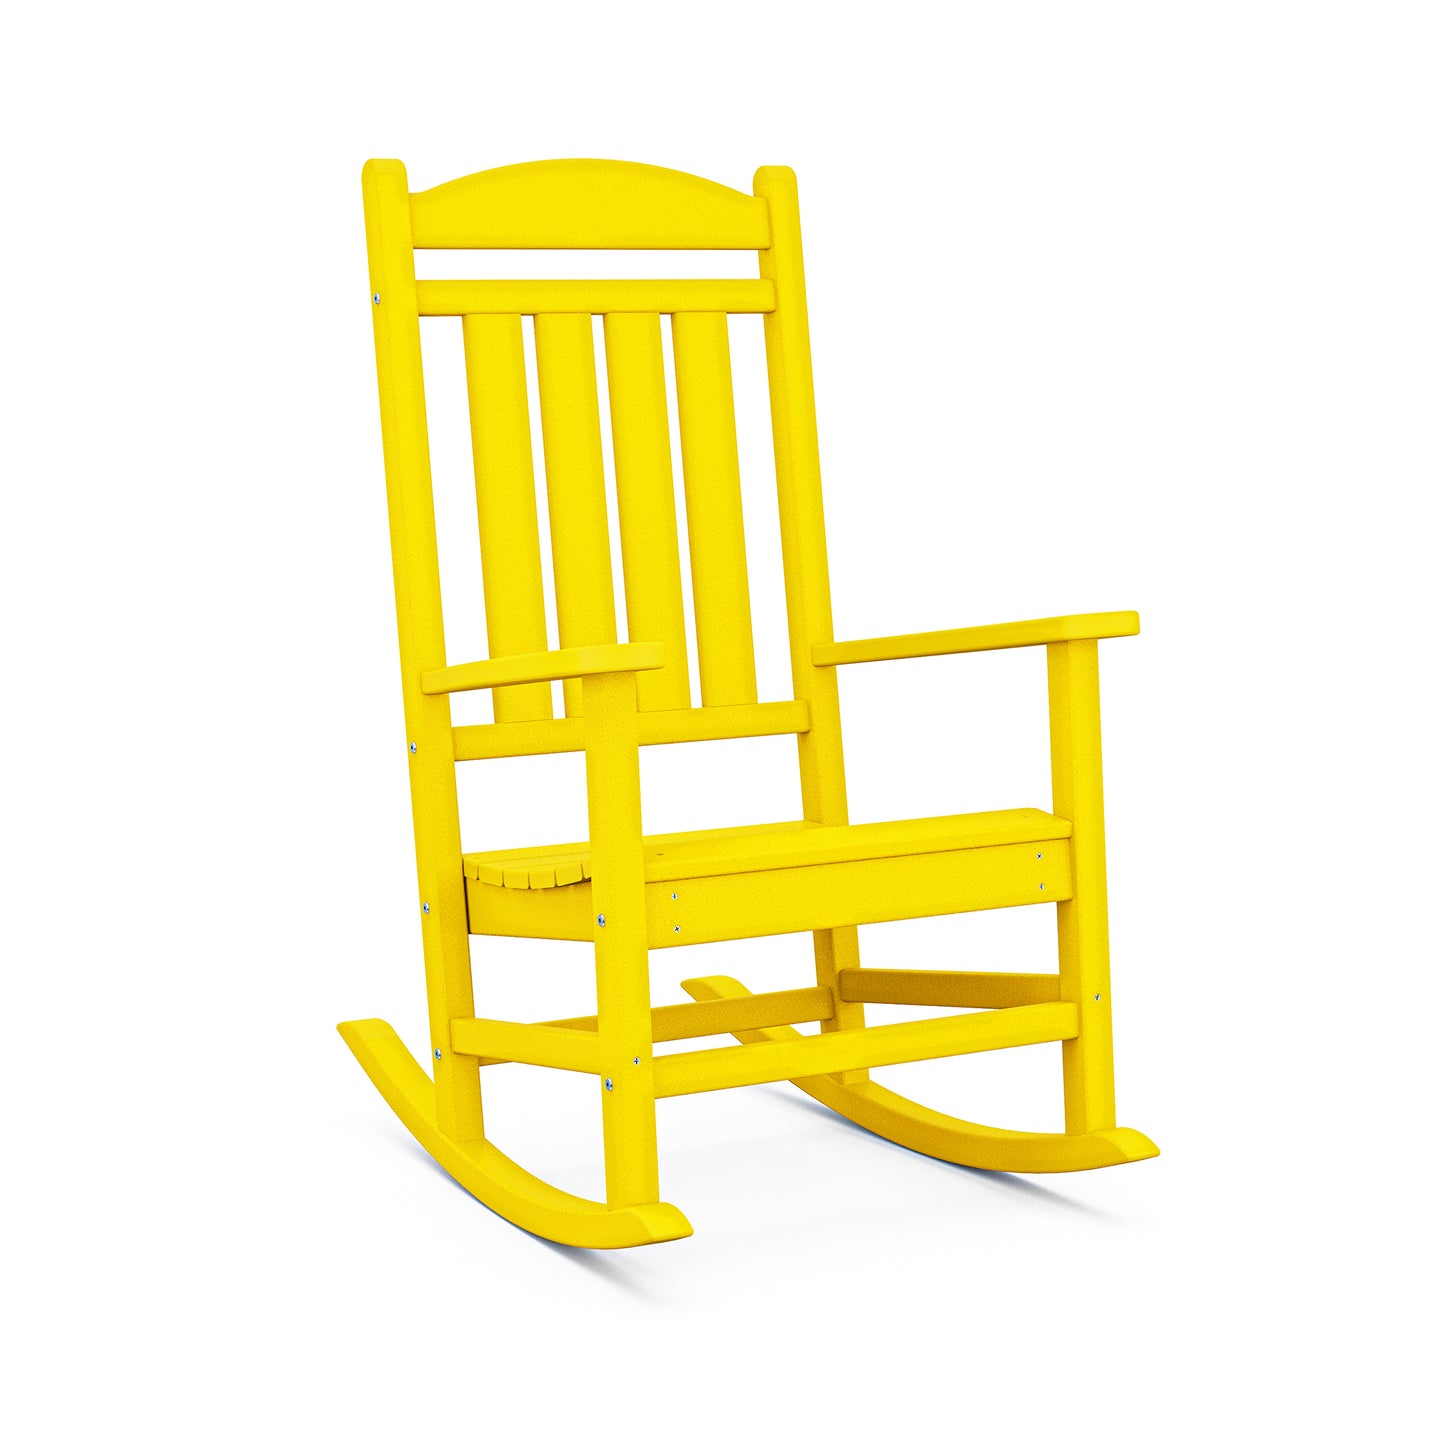 A bright yellow POLYWOOD Presidential Outdoor Rocking Chair isolated on a white background. The chair features a traditional slatted back and seat, with curved rocking legs crafted from recycled plastic.